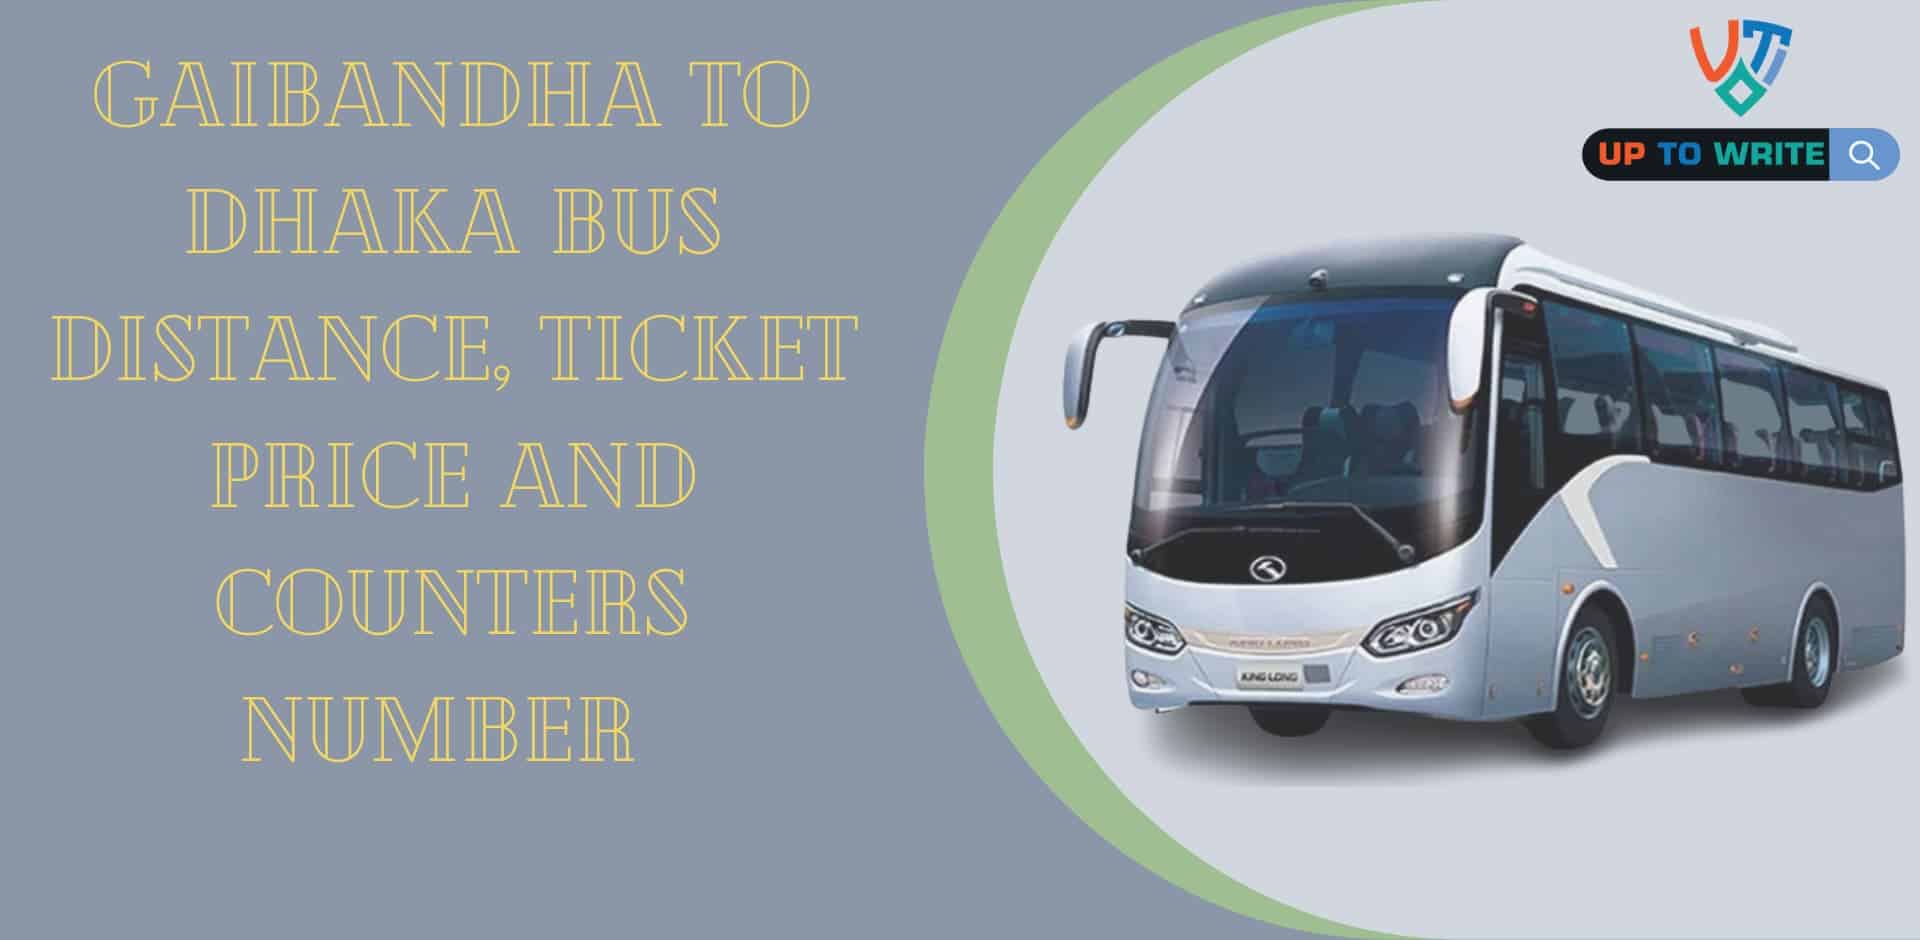 Gaibandha To Dhaka Bus Distance, Ticket Price and Counters Number